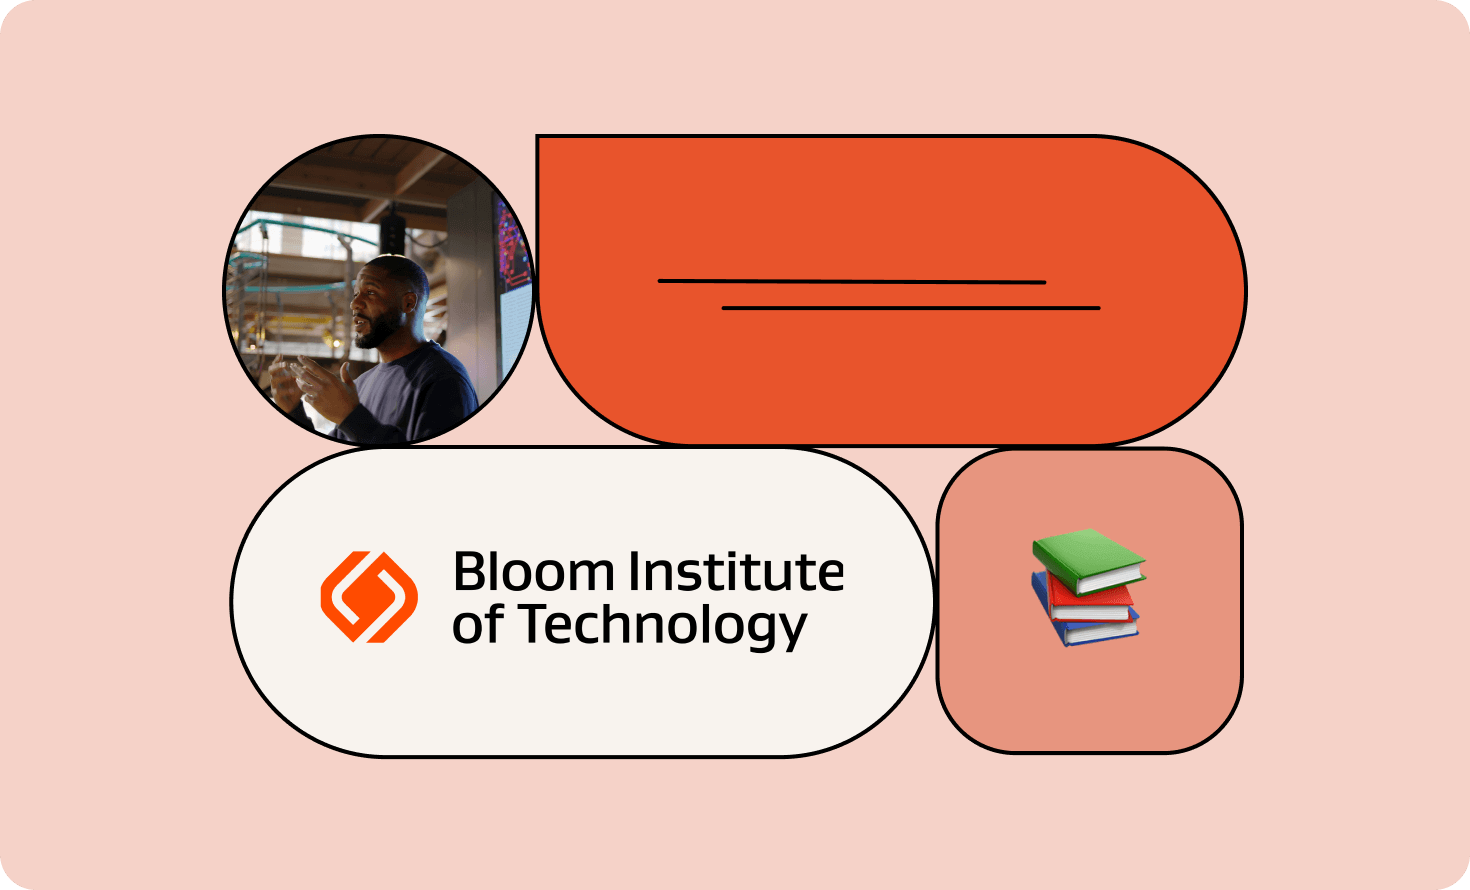 Illustration with person, books emoji, and Bloom Institute of Technology logo